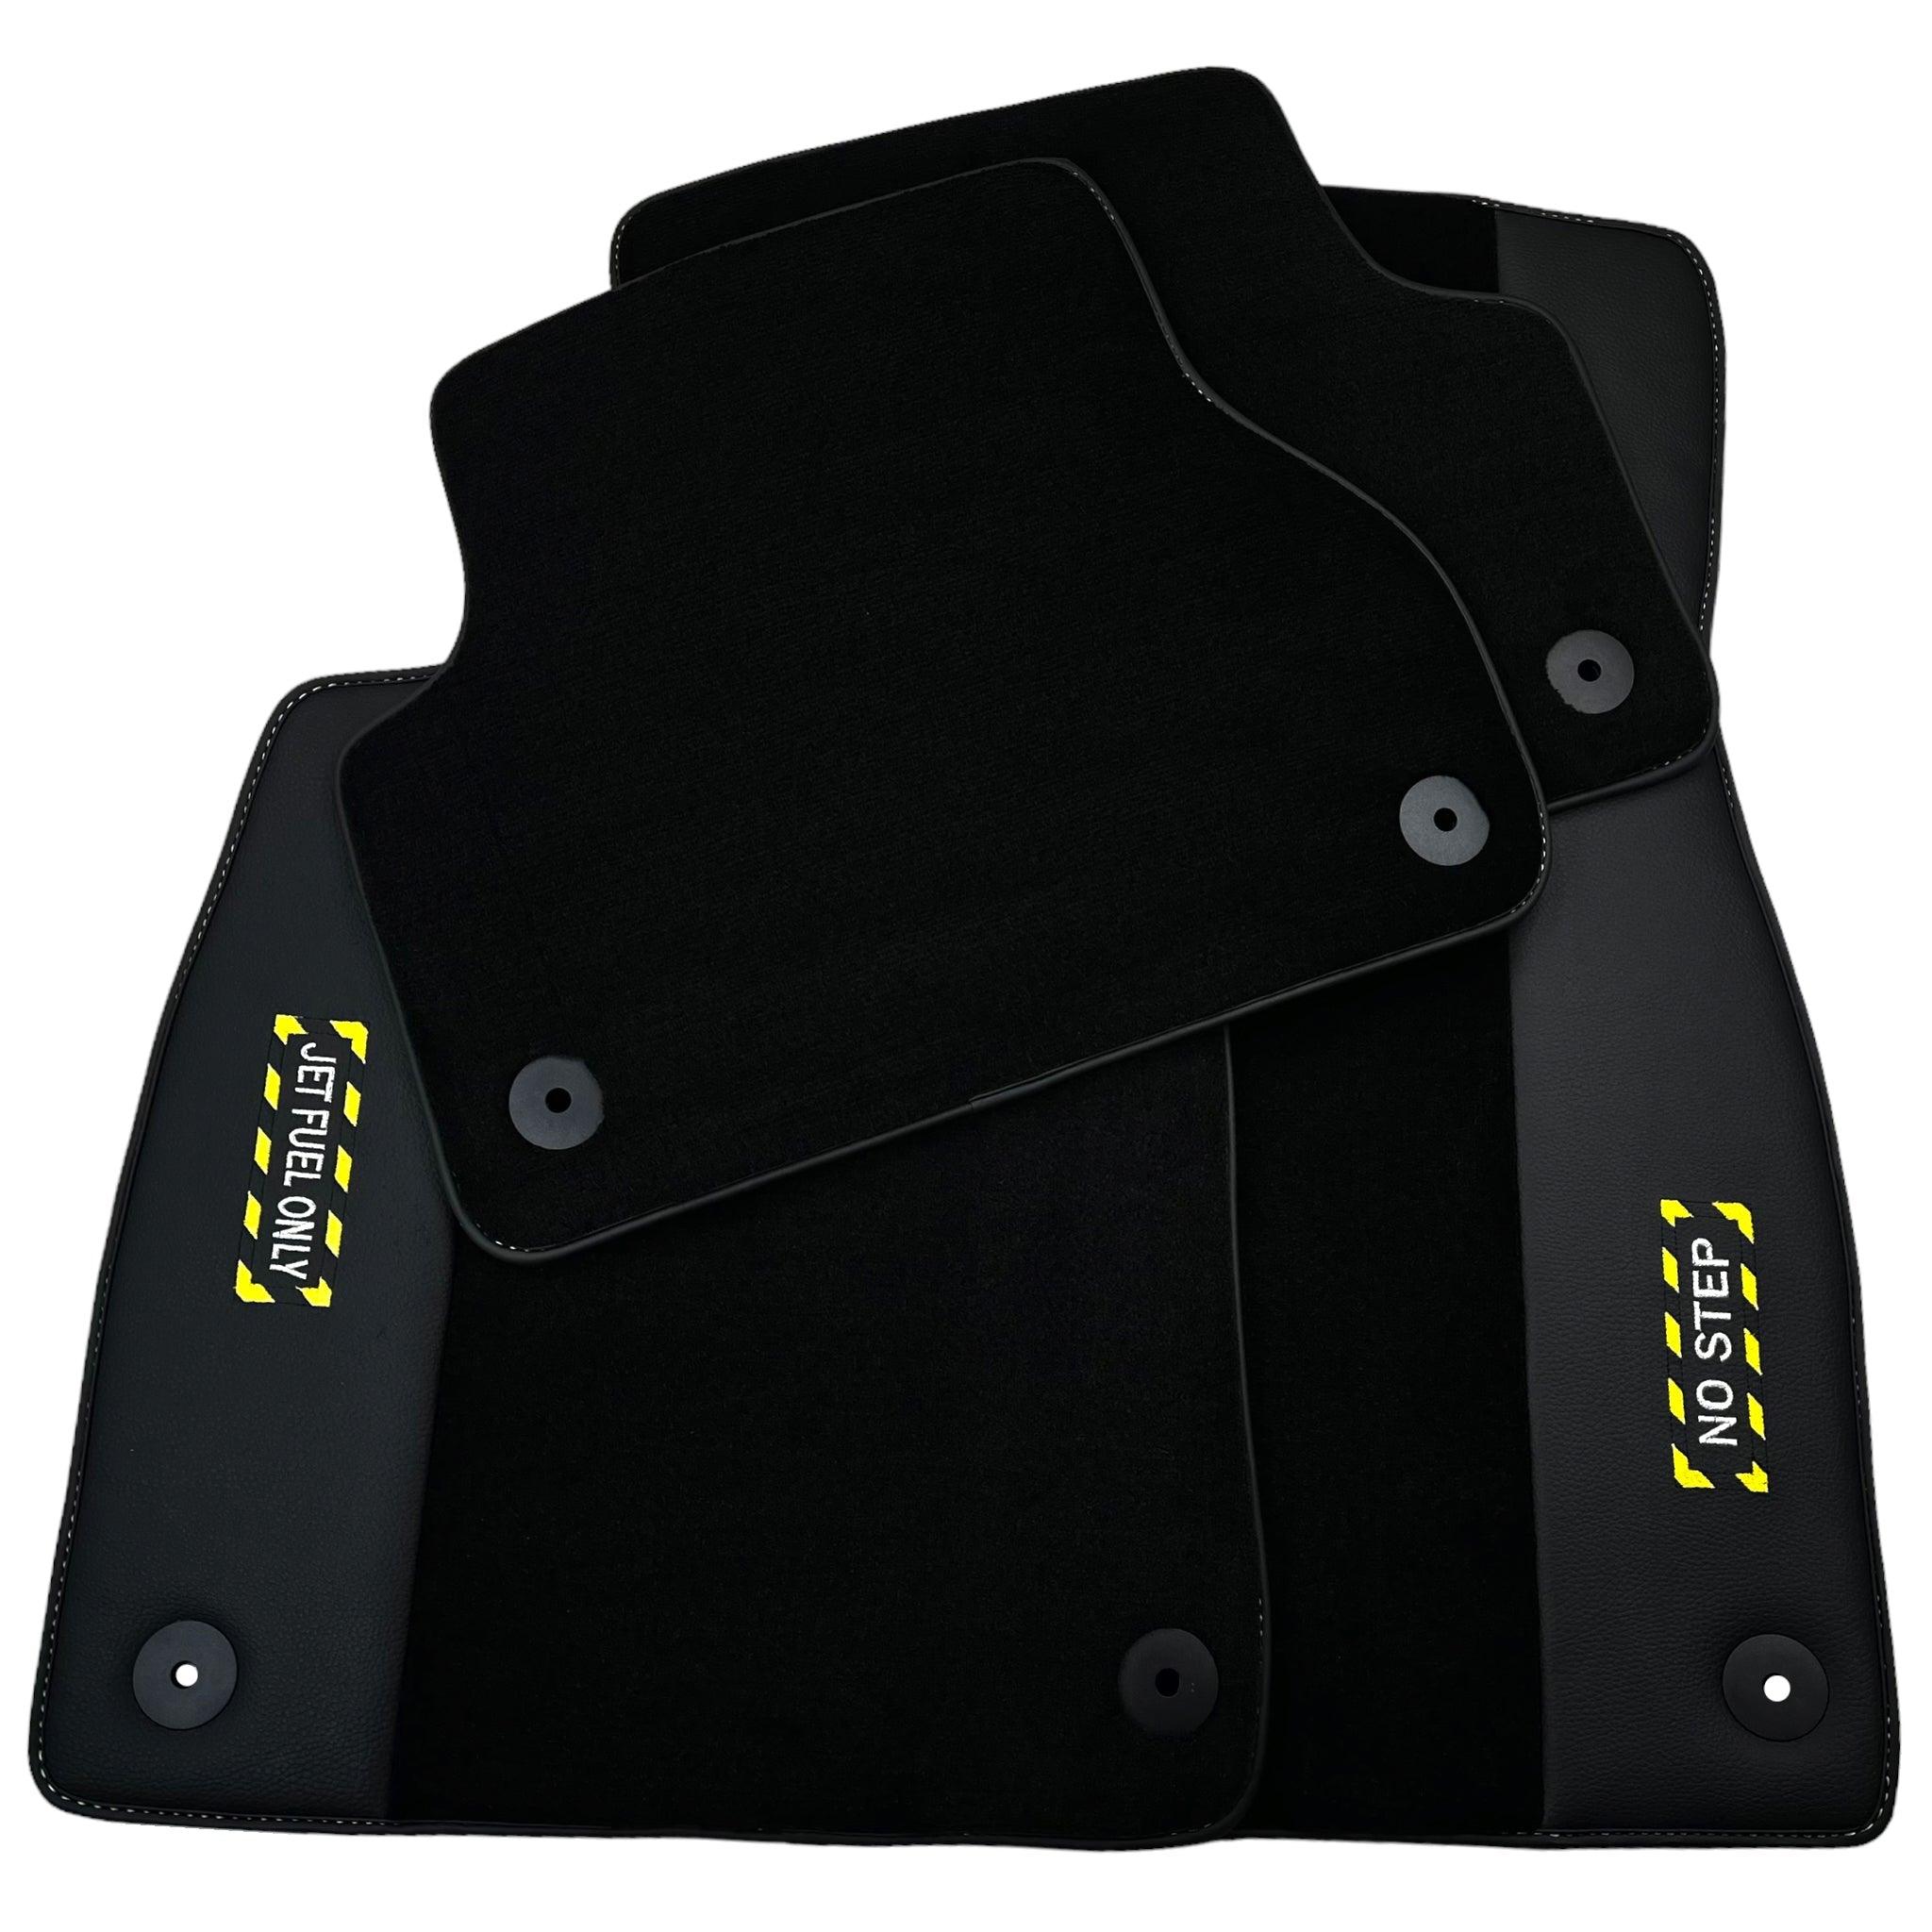 Black Floor Mats for Audi A3 - Convertible (2008-2013) | Fighter Jet Edition